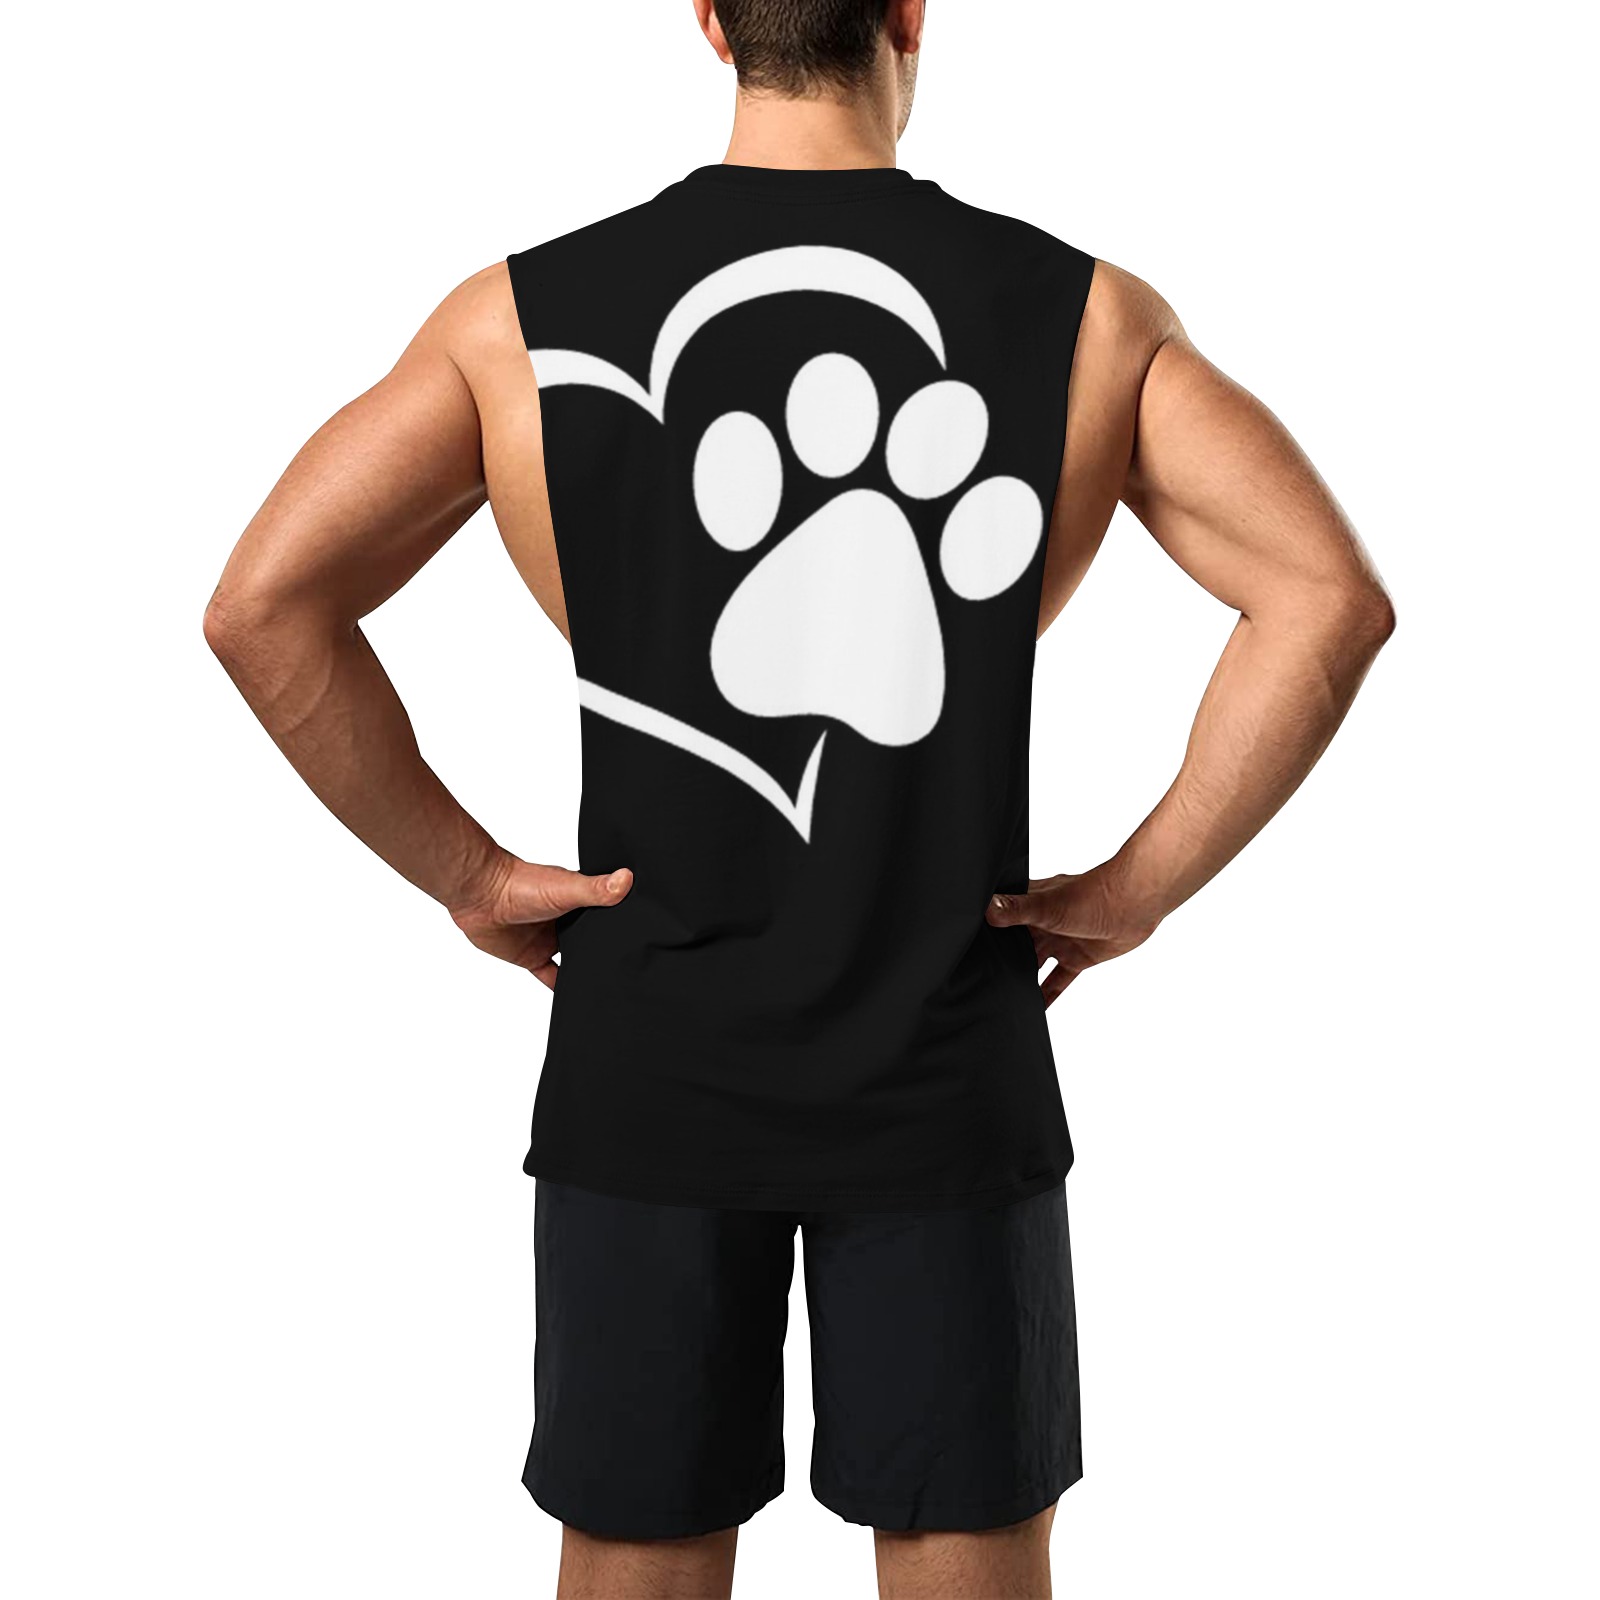 Gay Pup Woof by Fetishworldgay Men's Open Sides Workout Tank Top (Model T72)